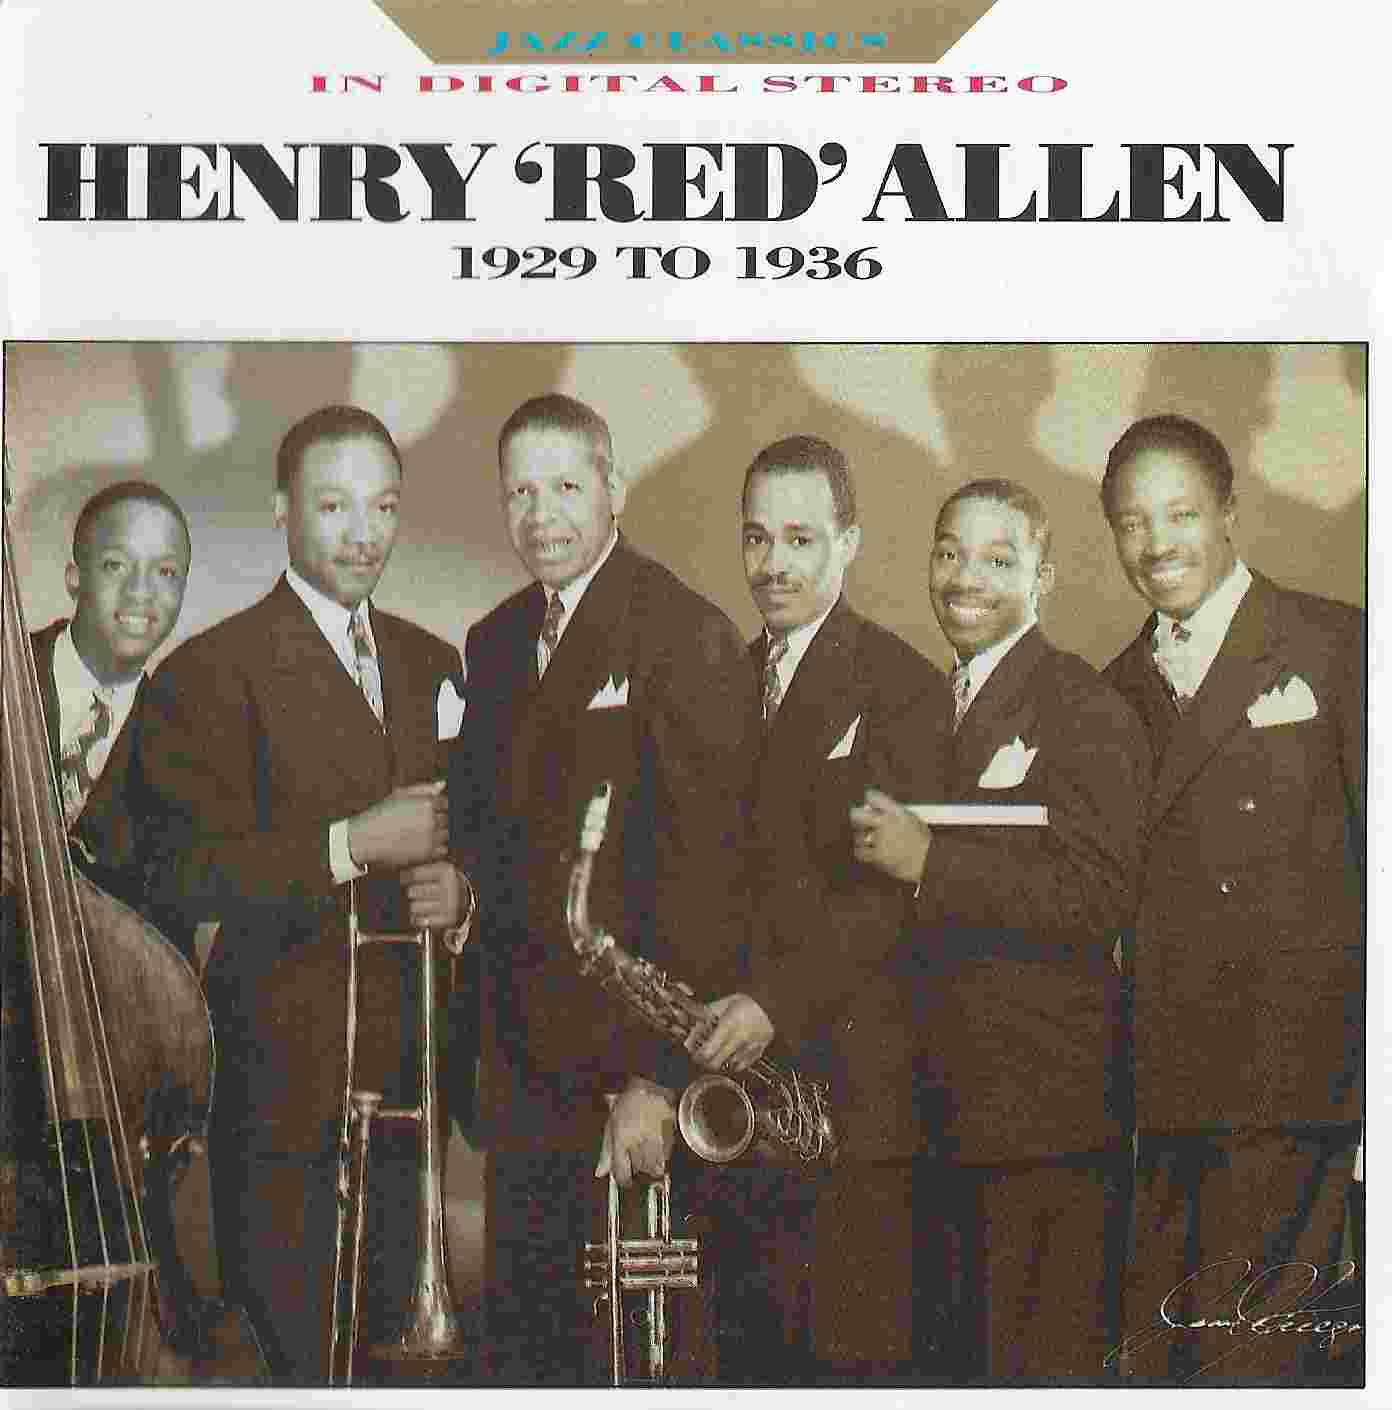 Picture of BBCCD685 Jazz classics - Henry 'Red' Allen by artist Henry 'Red' Allen from the BBC cds - Records and Tapes library